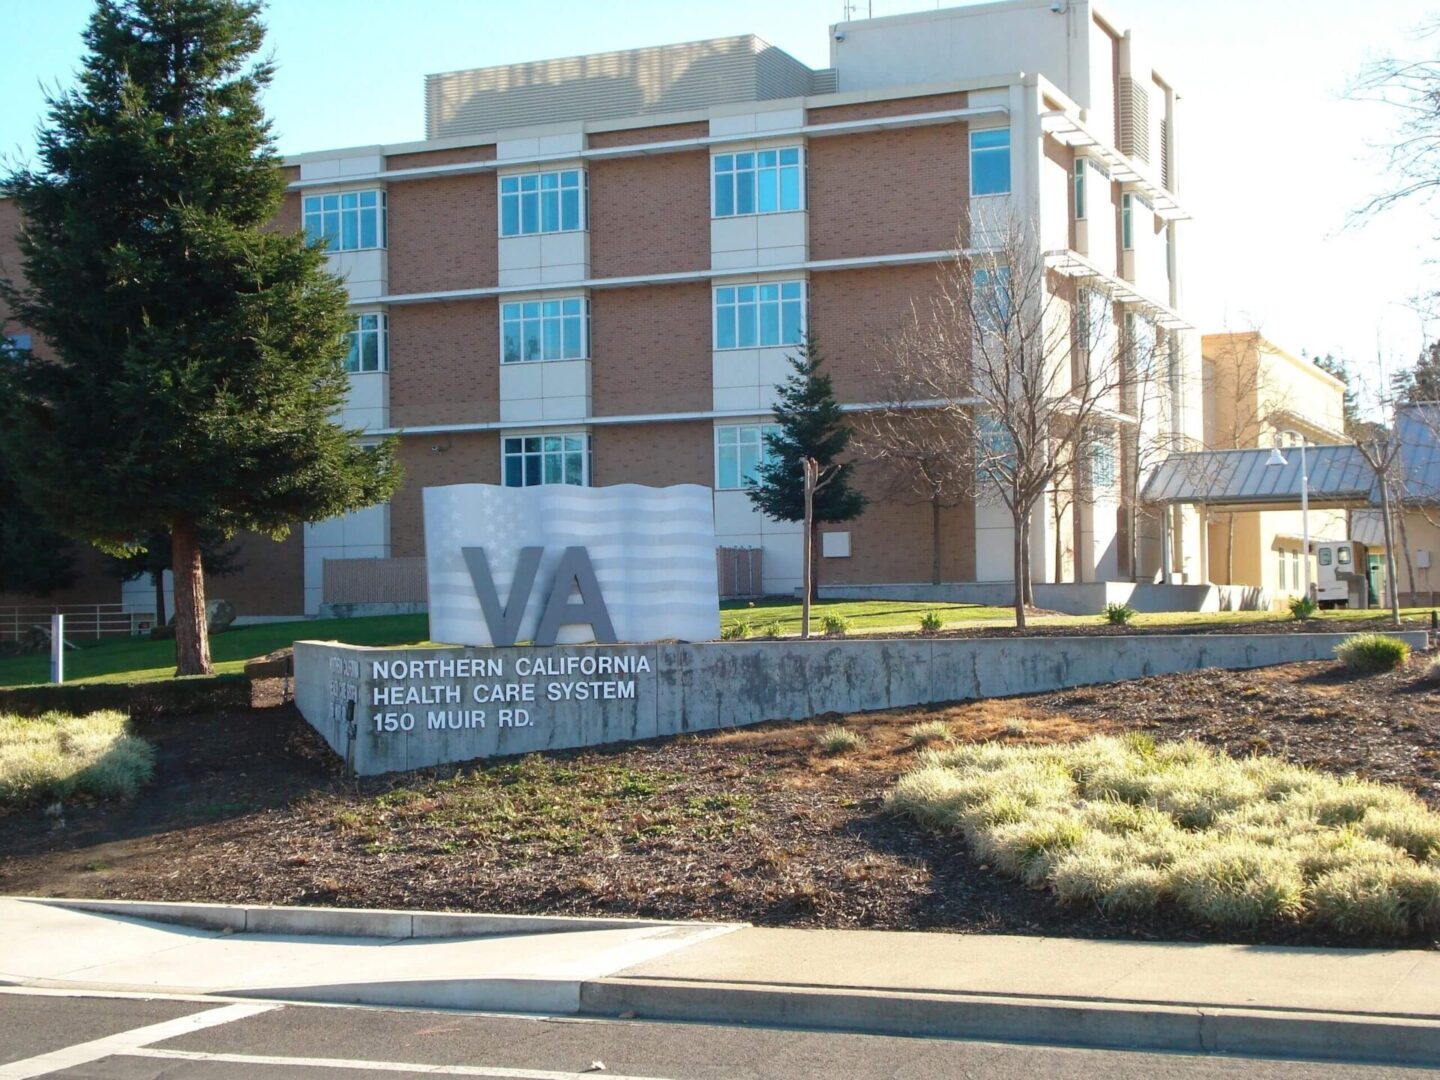 A building with the va sign on it.